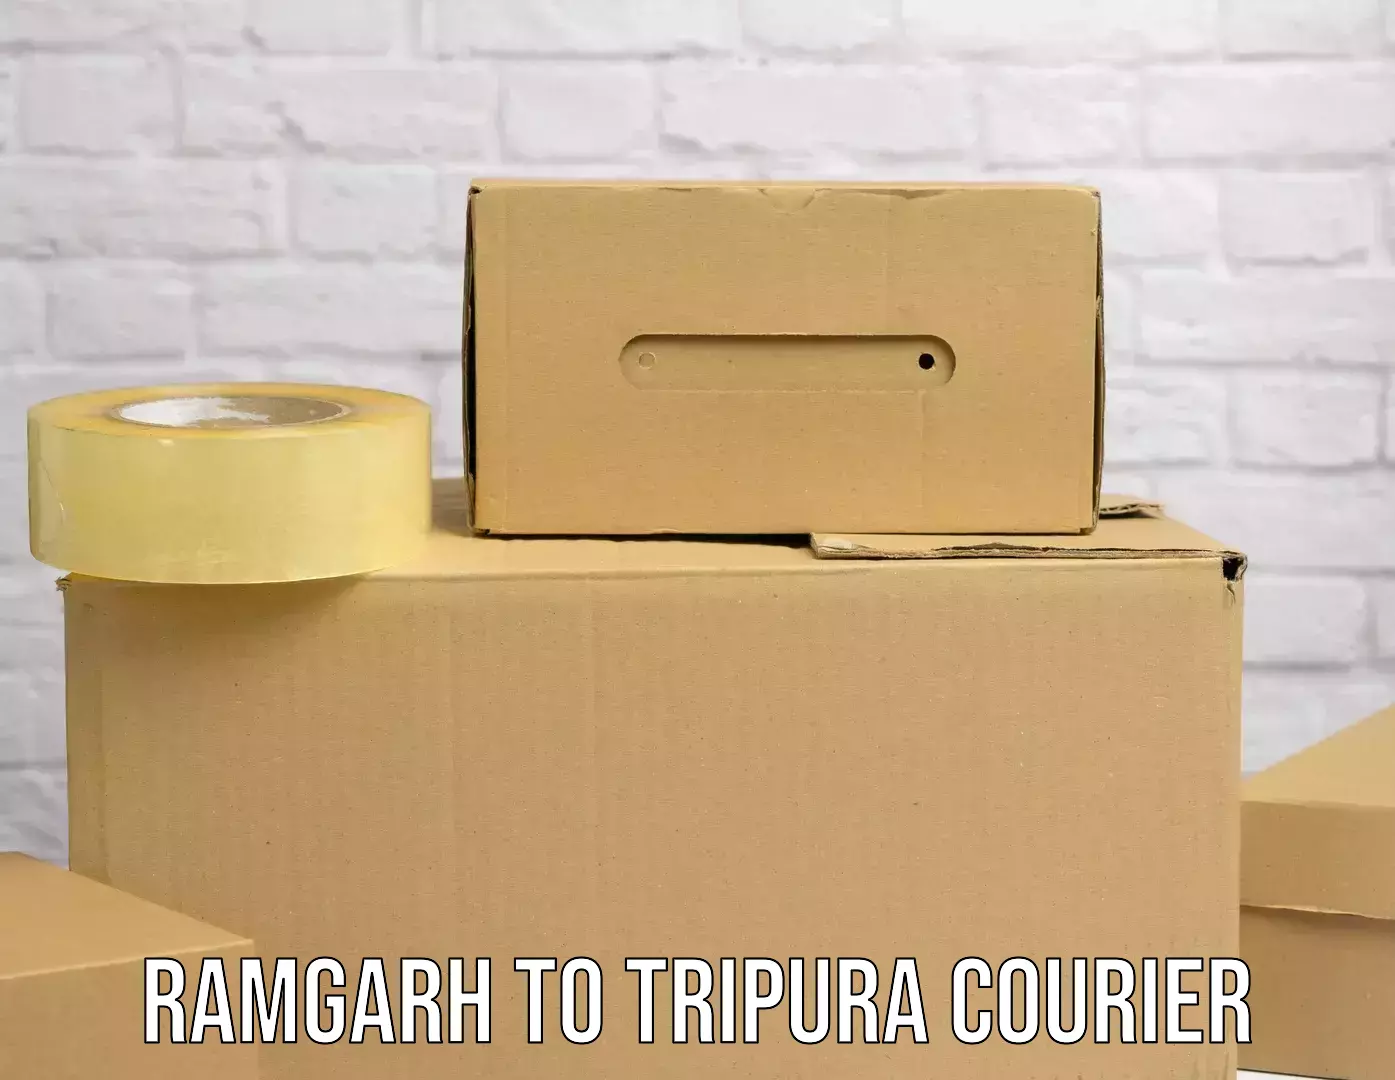 Next-day delivery options Ramgarh to Udaipur Tripura